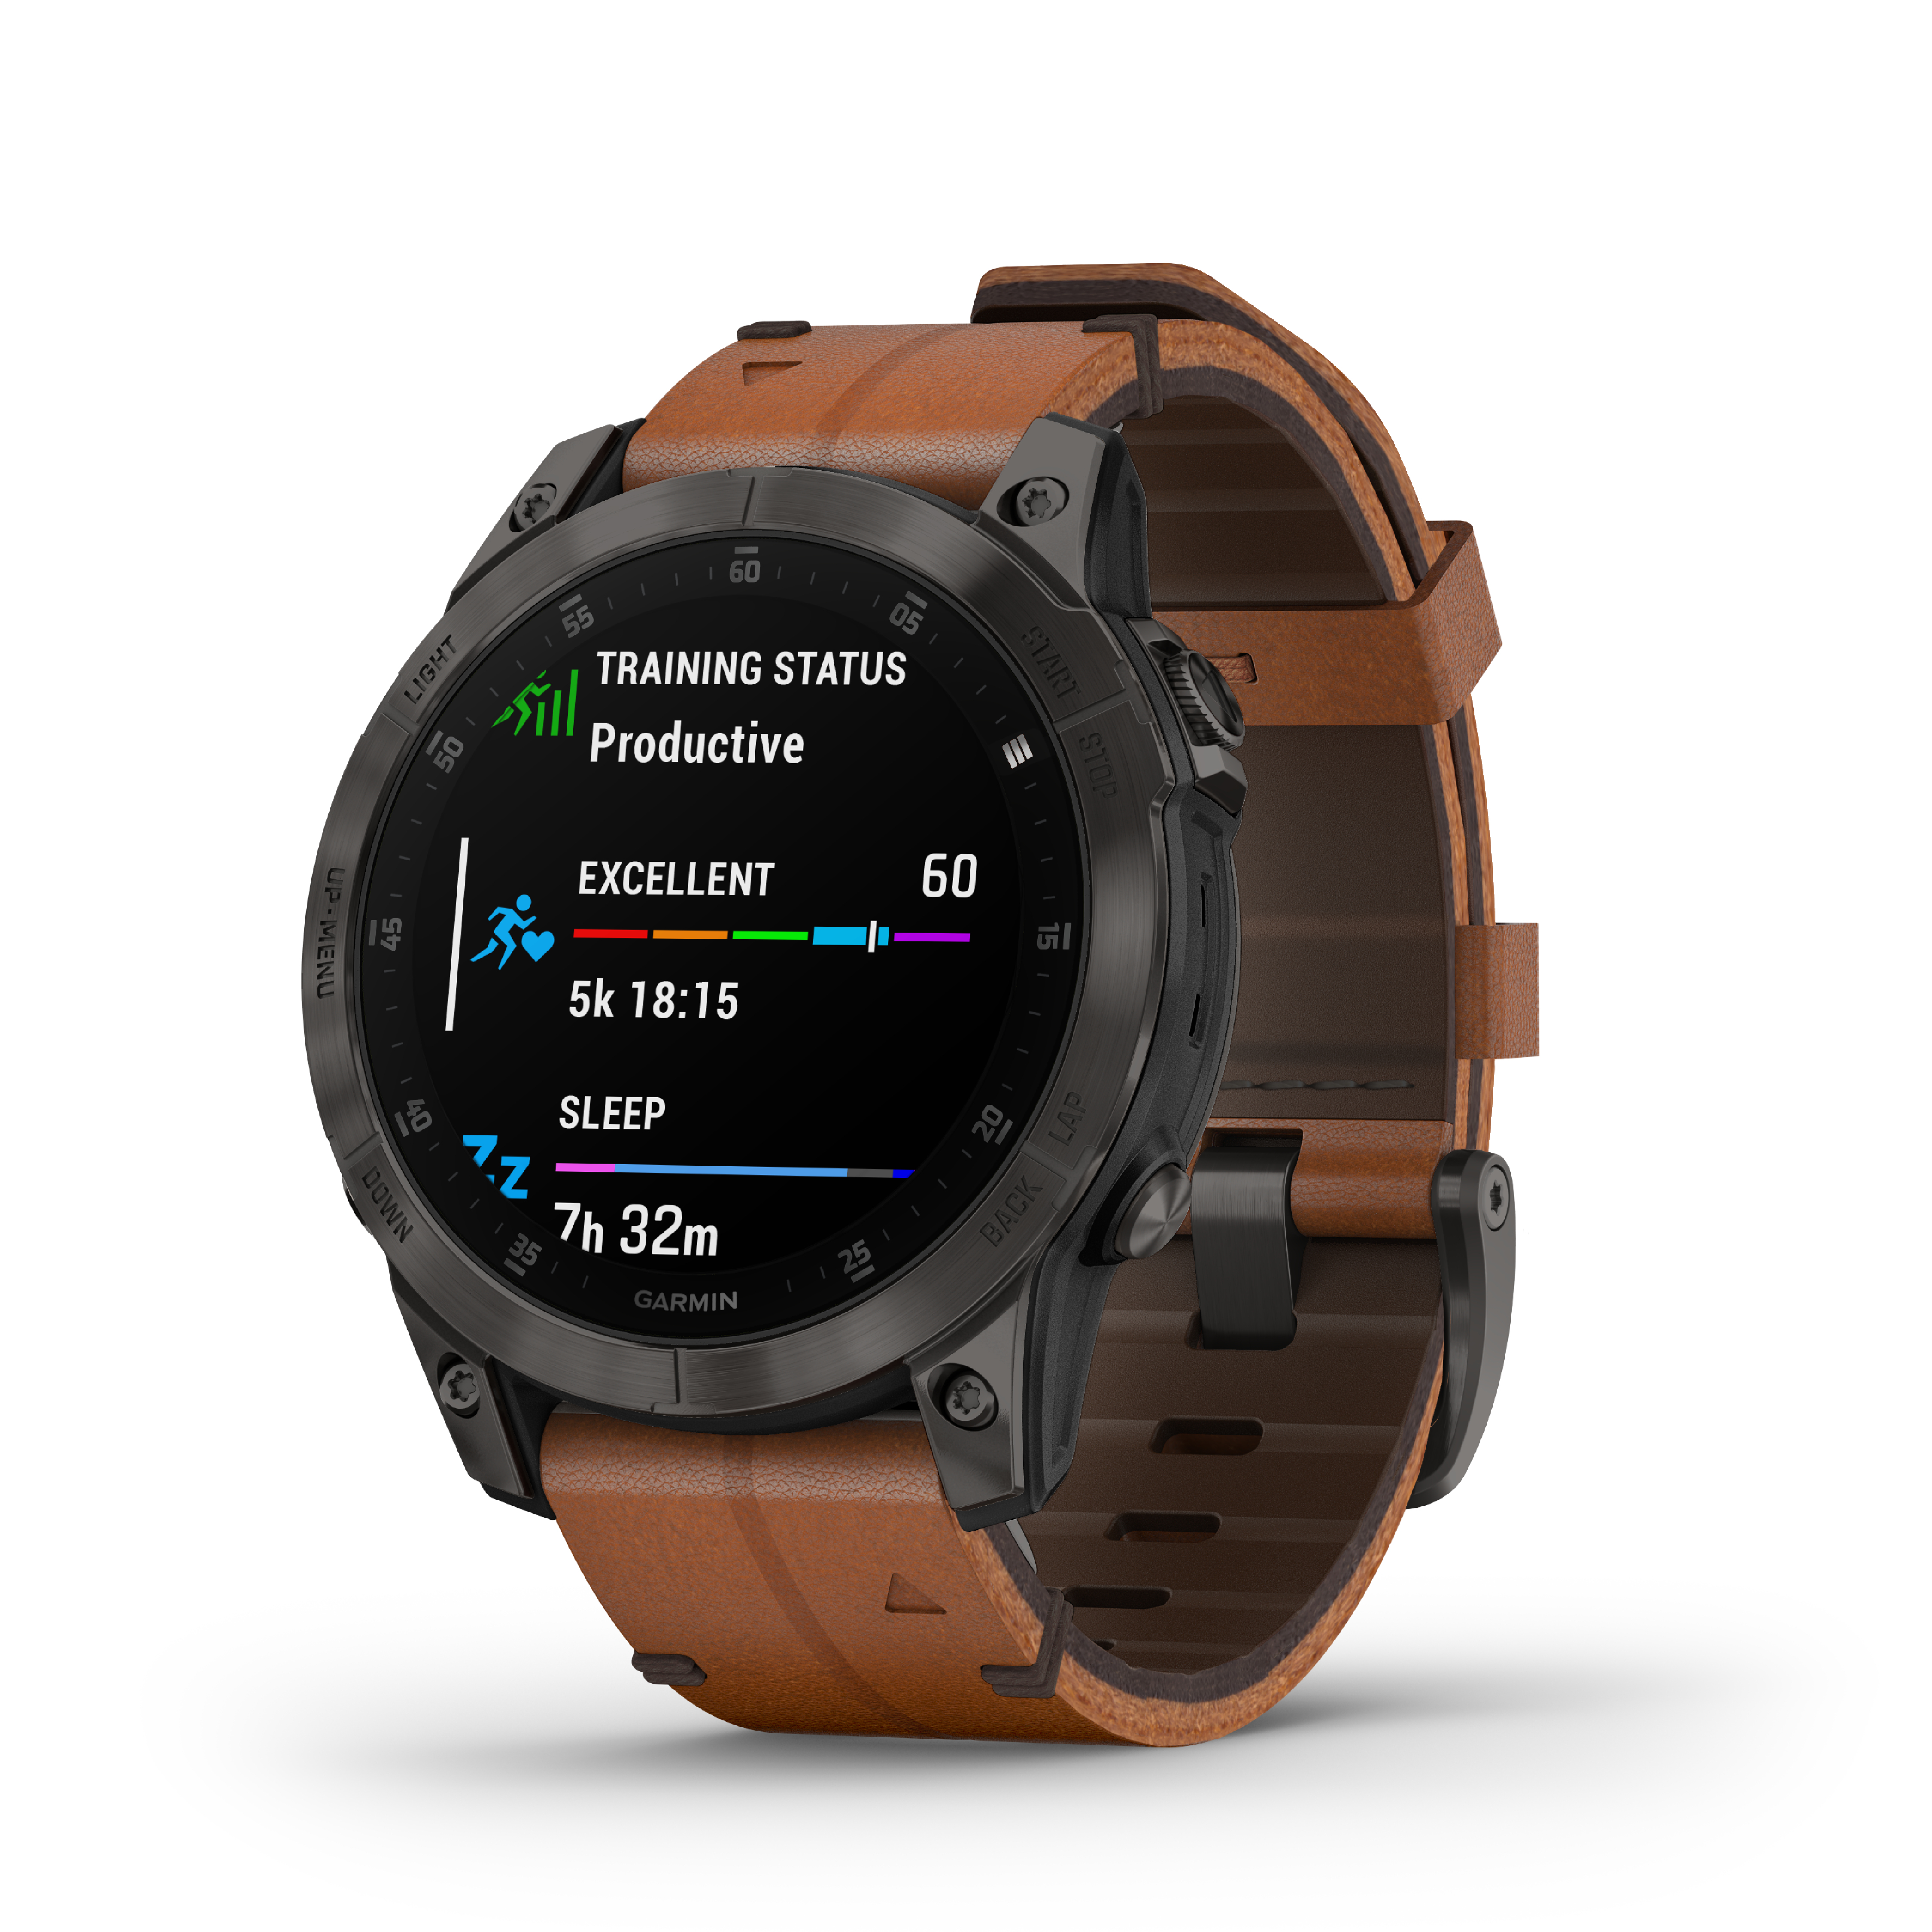 Tackle outdoor challenges easily with these newly launched Garmin smartwatches 2022 2